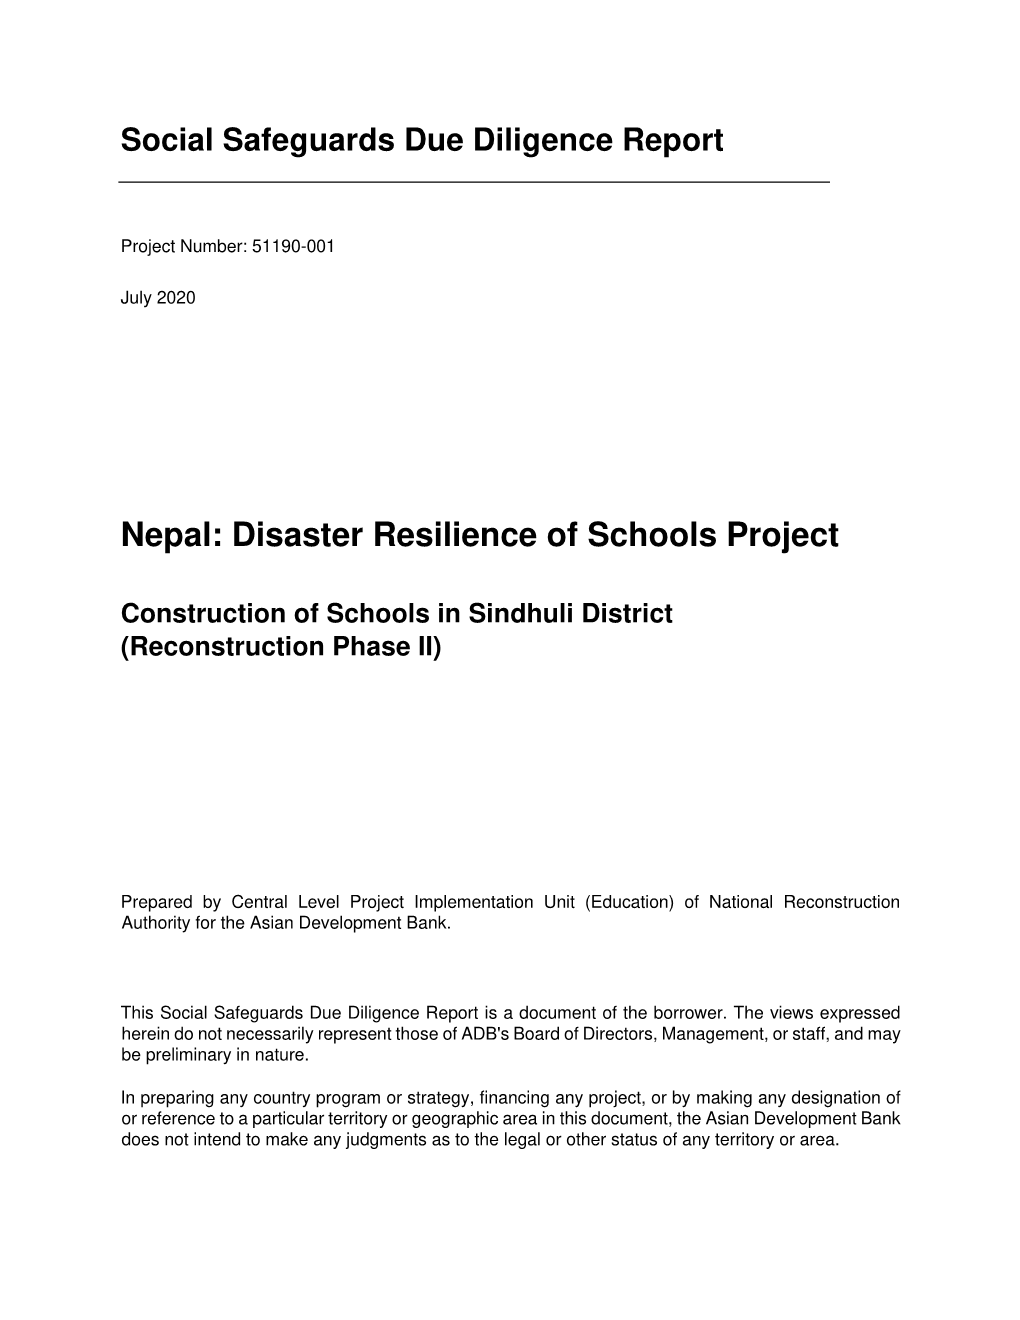 Nepal: Disaster Resilience of Schools Project